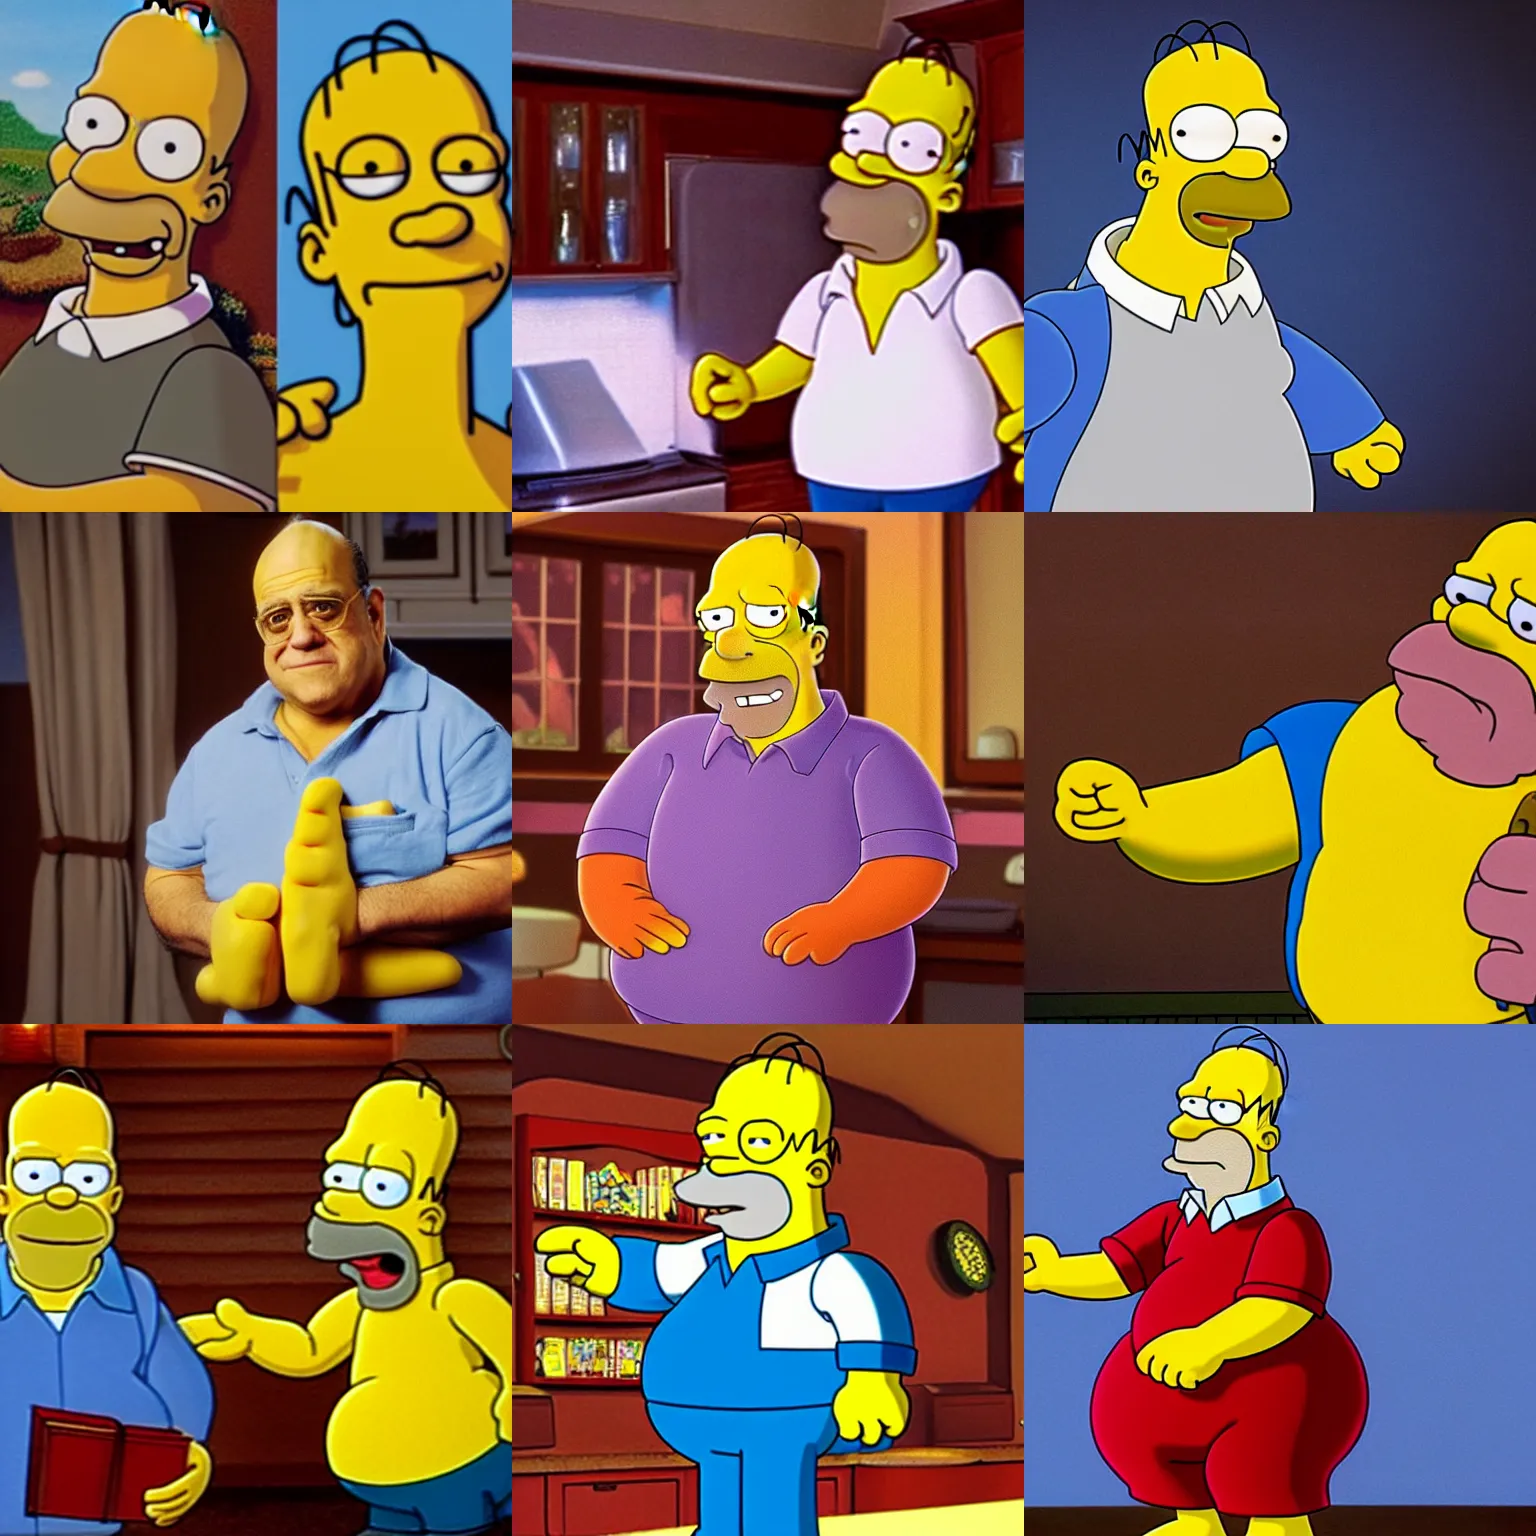 Prompt: <photo name='homer simpson' age='54' lighting=great hd sitcom>Danny Devito as Homer Simpson</photo>